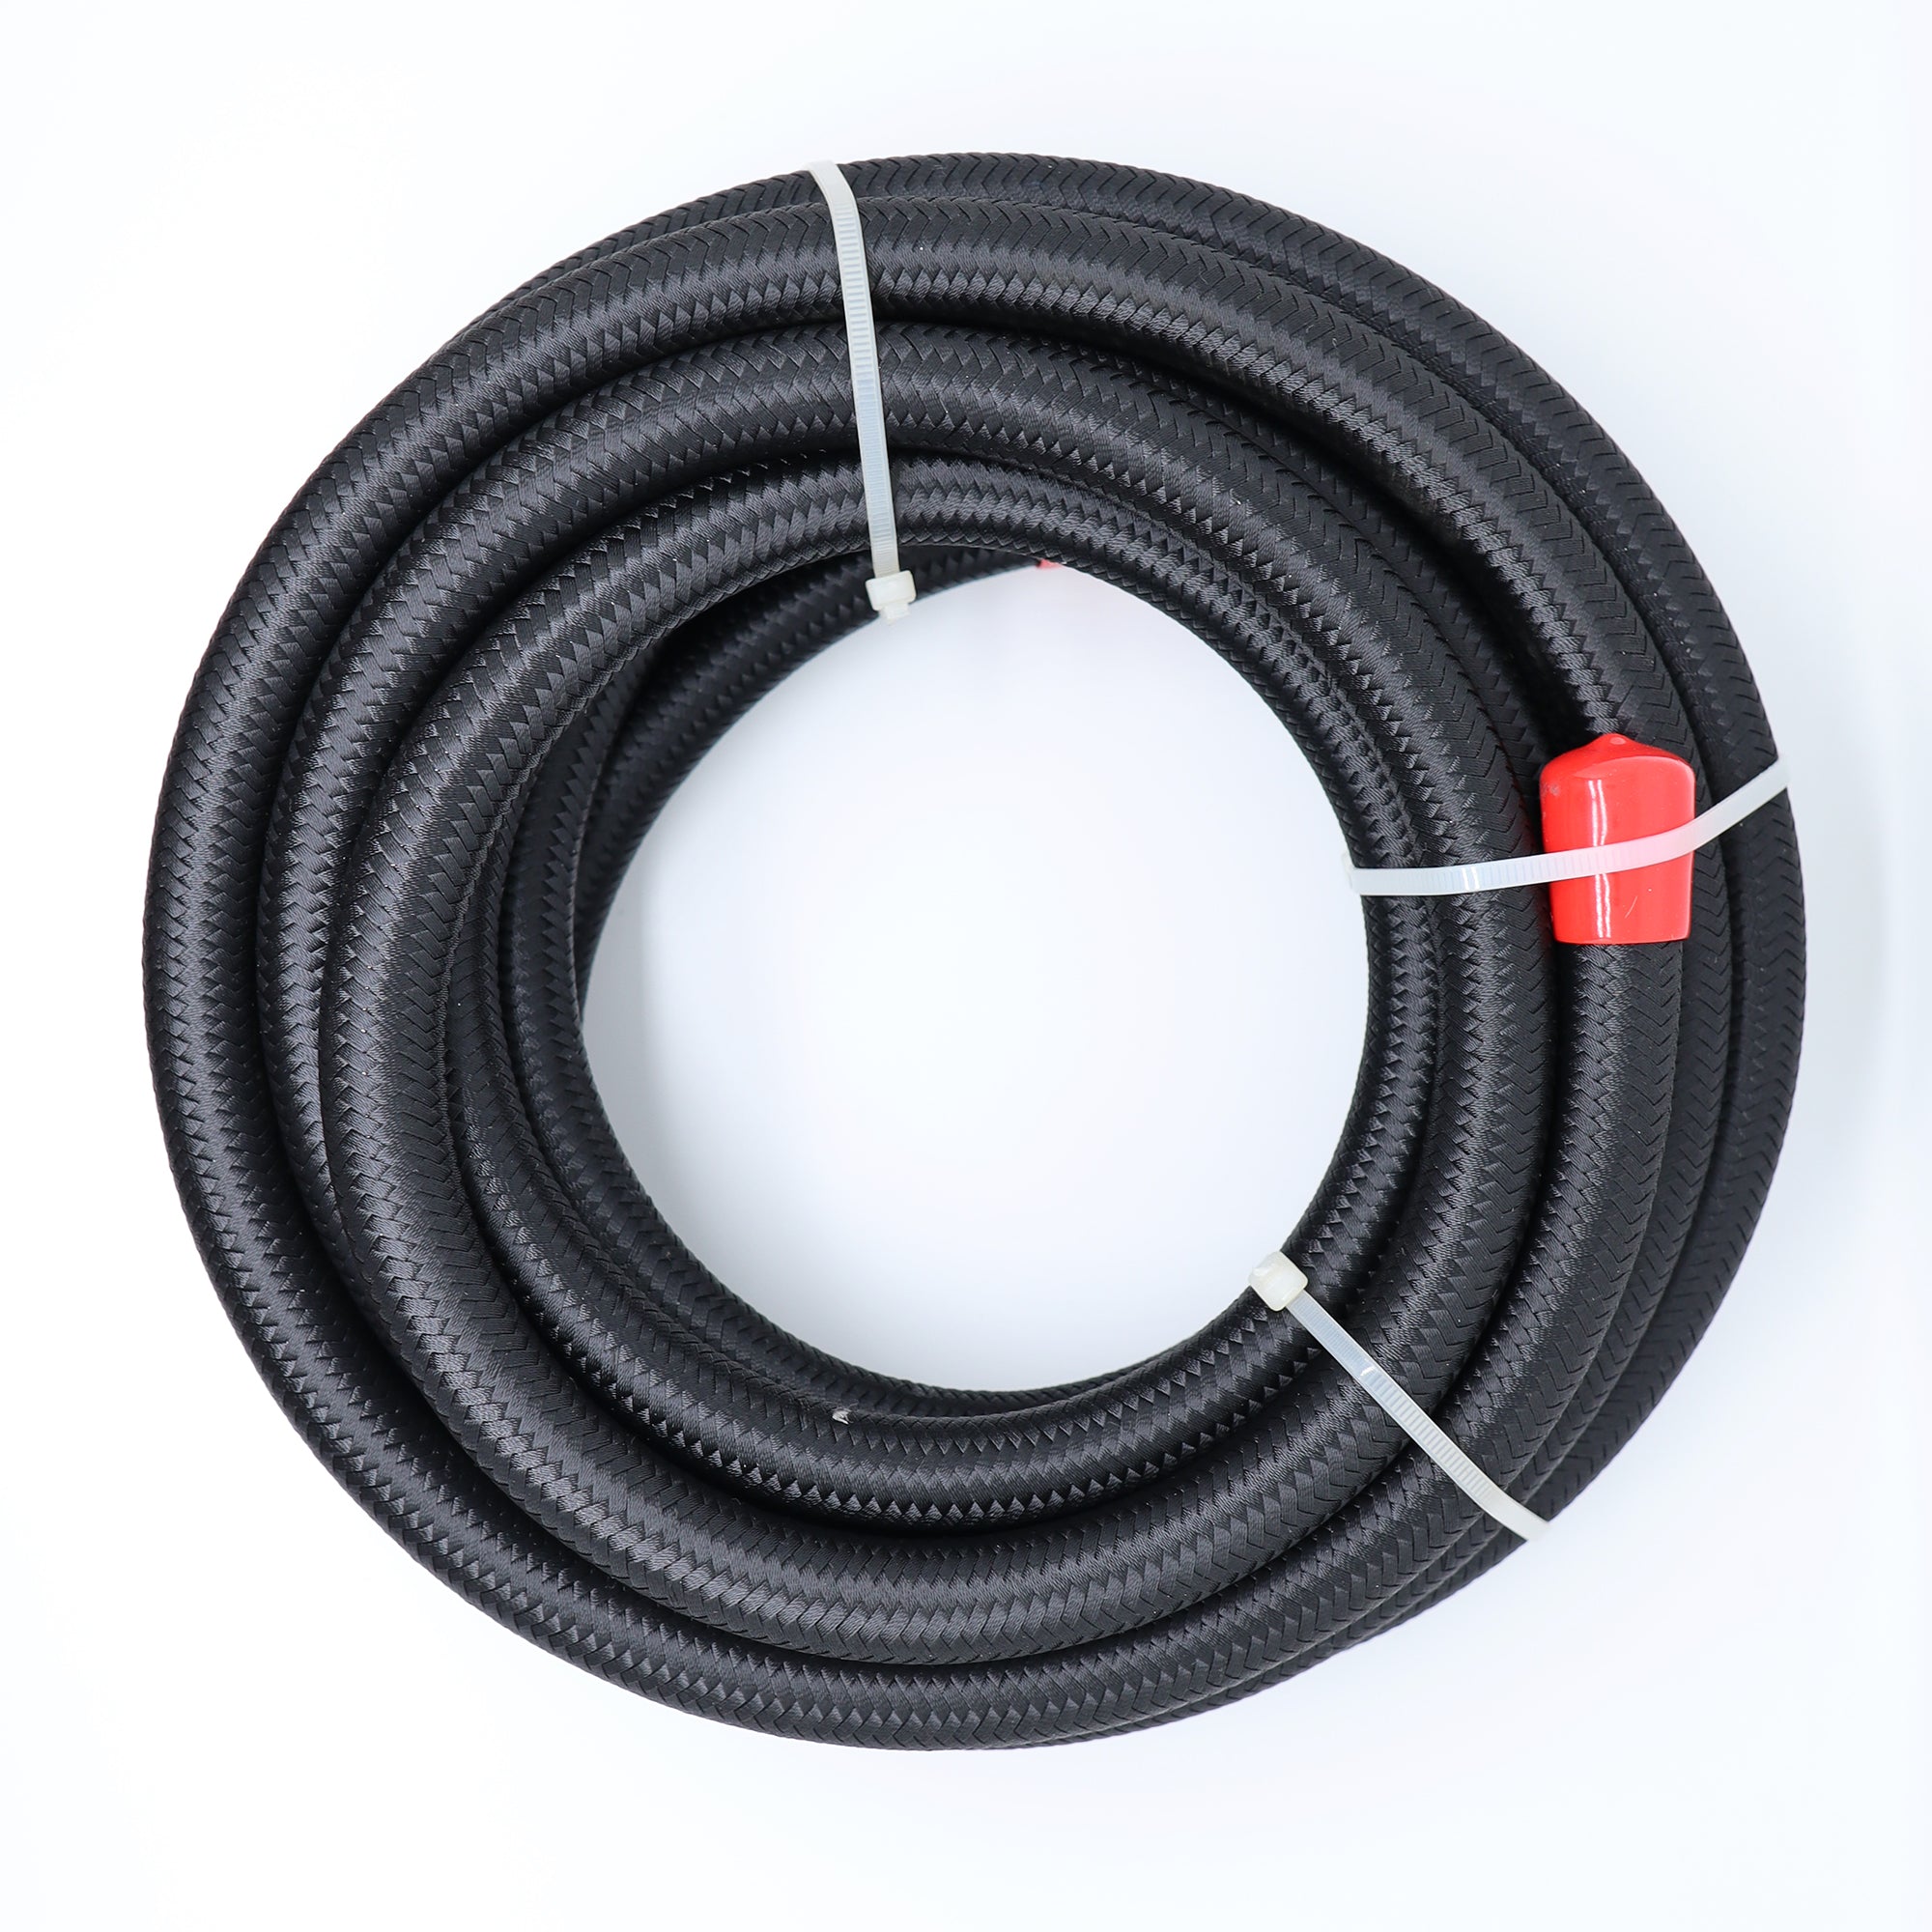 25FT PTFE Fuel line Kit: 6AN 3/8 Fuel Hose EFI LS Fuel Injection line E85  Oil Gas Hose Fitting Kit Nylon Stainless Steel